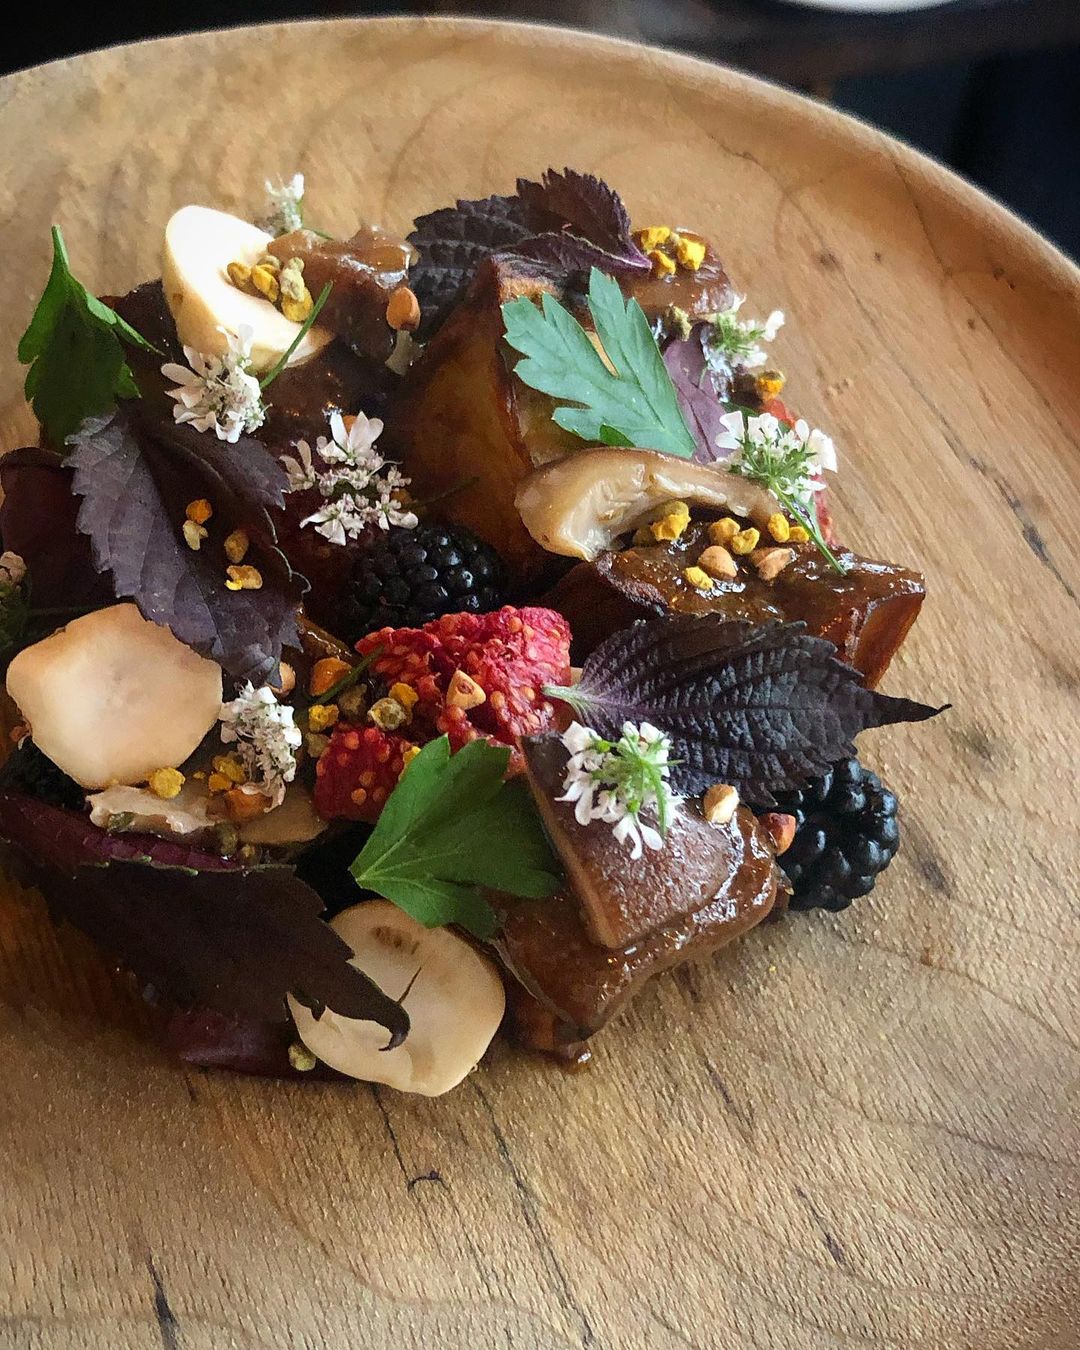 A deep fried eggplant dish with fig, hazelnut, blackberries, pollen, parsley and more at Septime